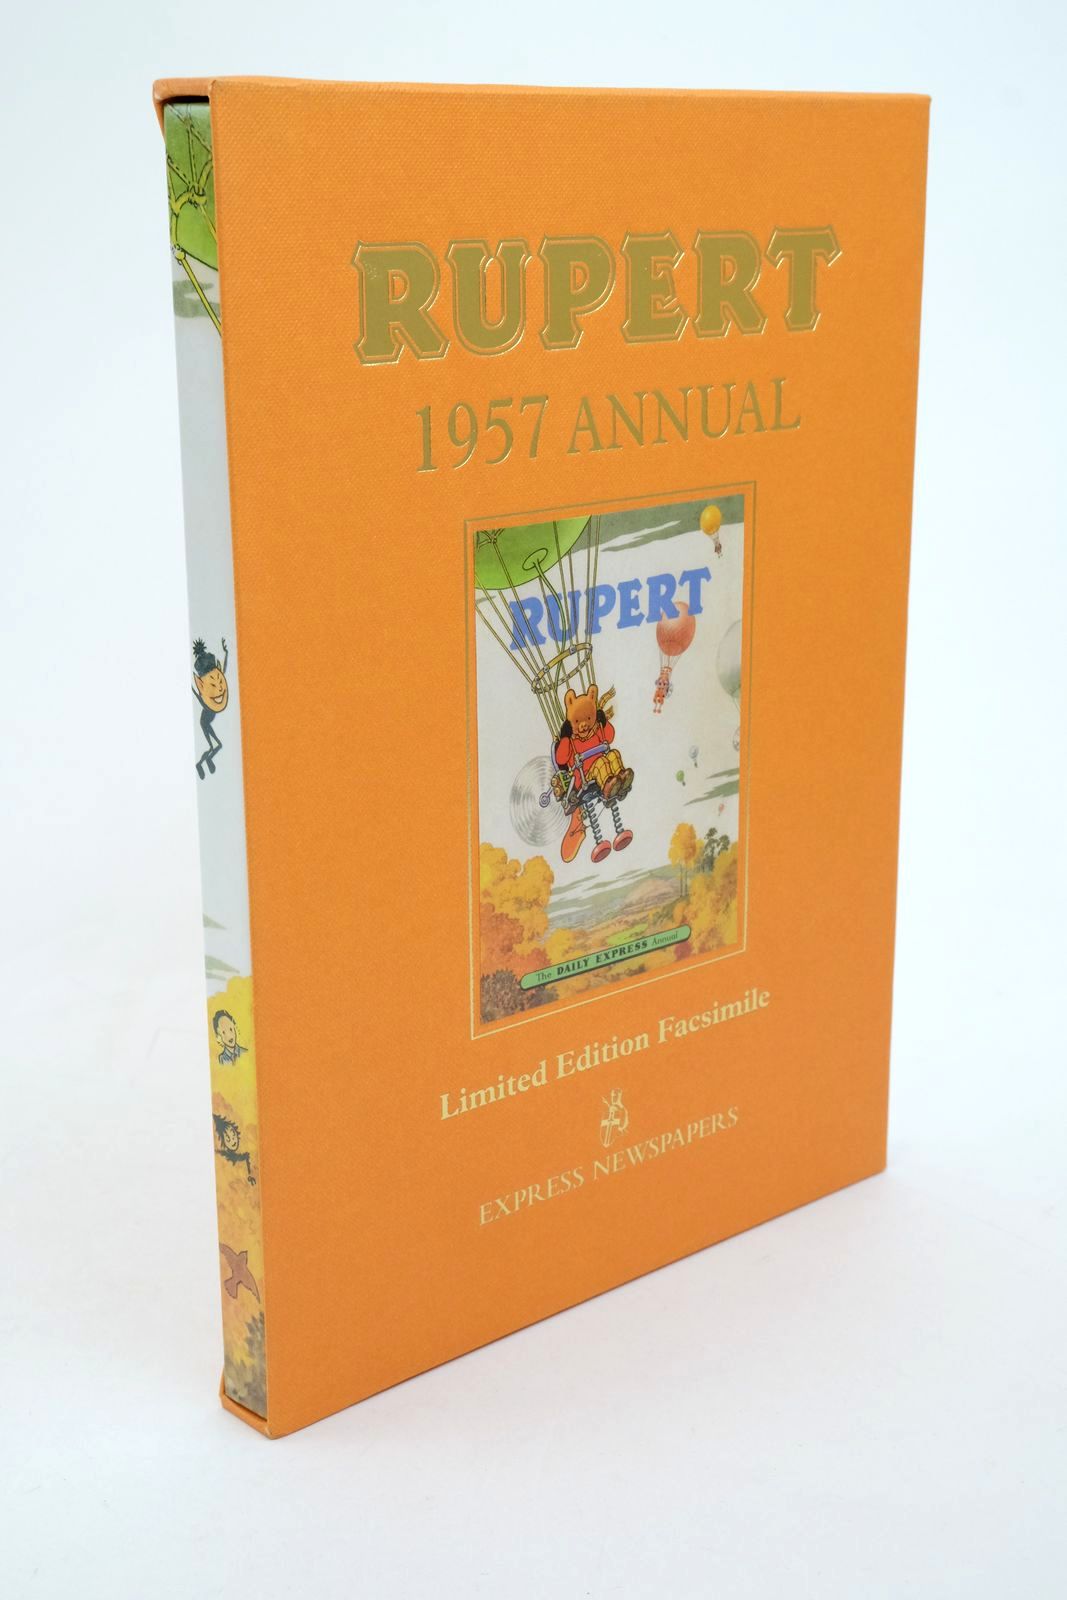 Photo of RUPERT ANNUAL 1957 (FACSIMILE) written by Bestall, Alfred illustrated by Bestall, Alfred published by Express Newspapers Ltd. (STOCK CODE: 1322870)  for sale by Stella & Rose's Books